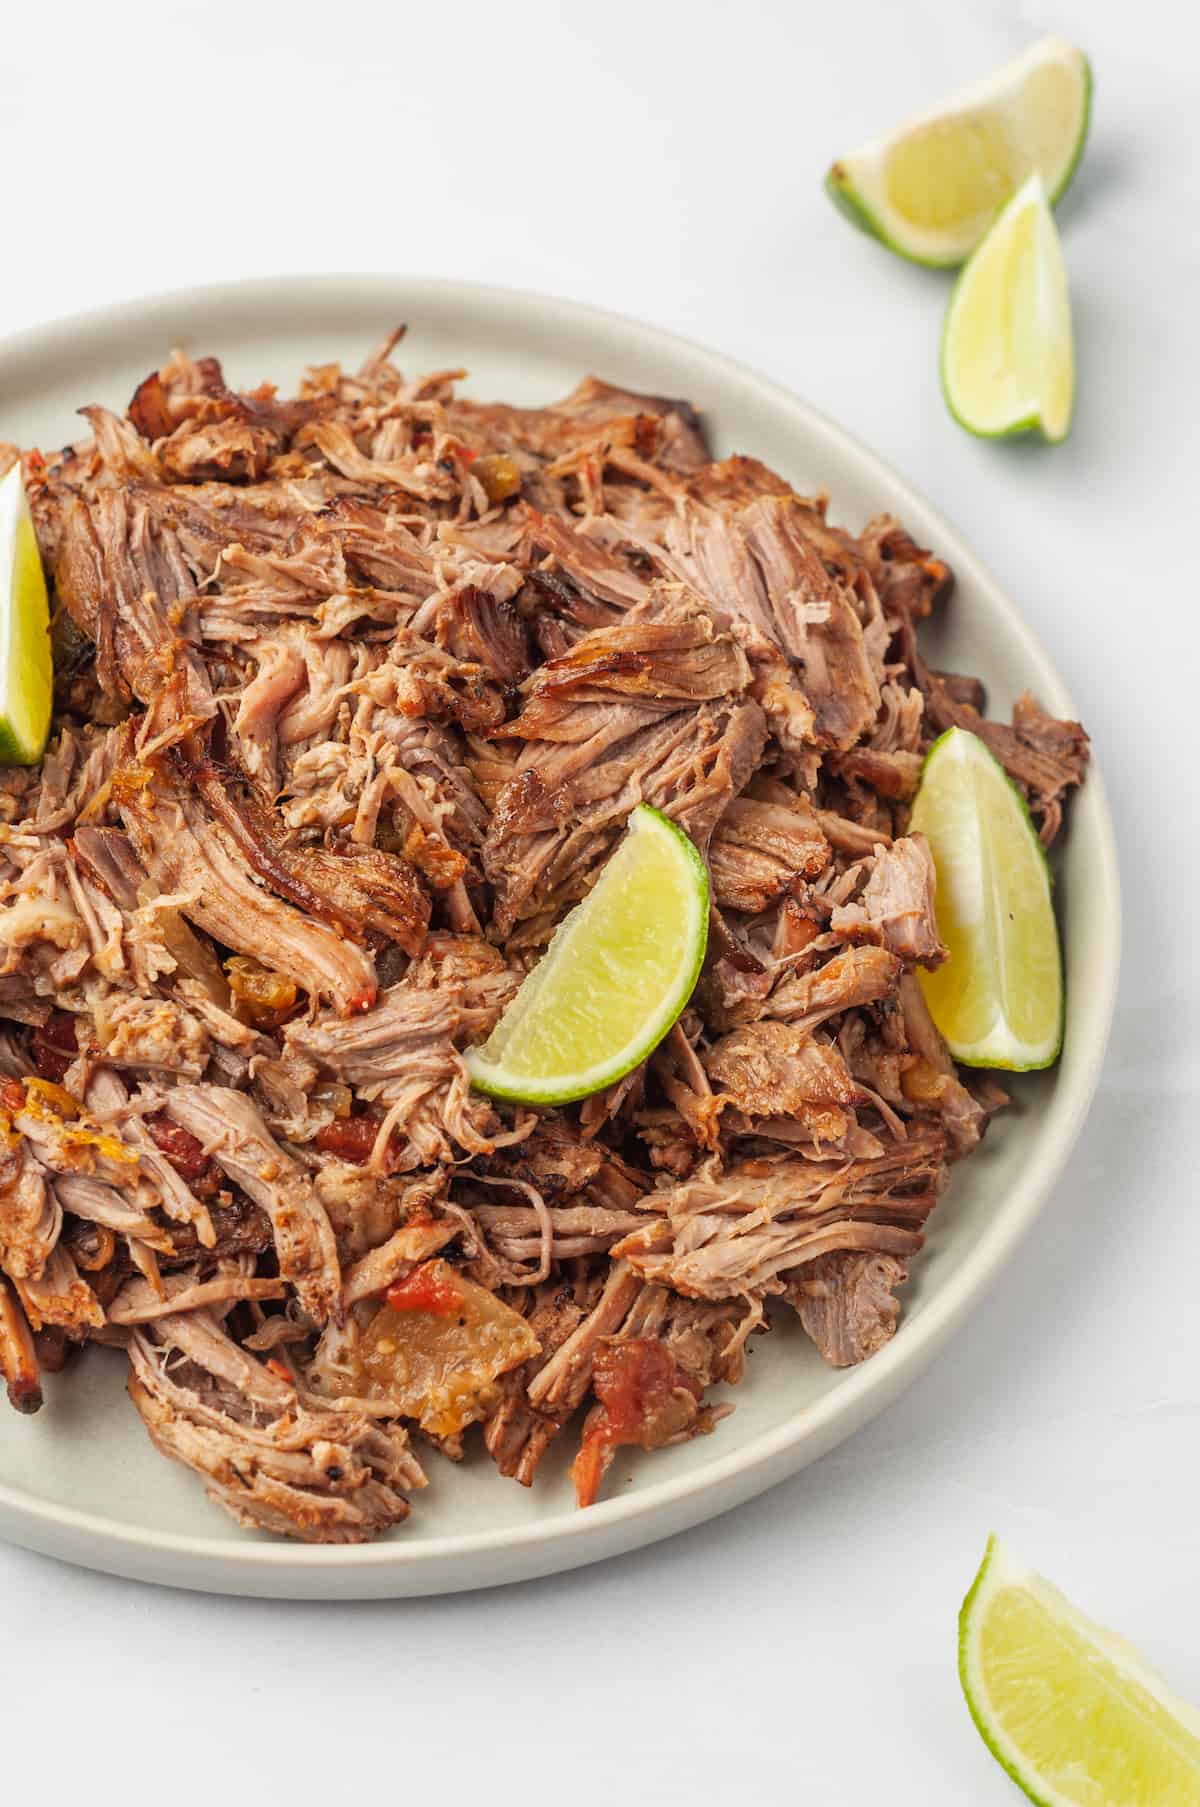 Plate of pork carnitas with lime wedges